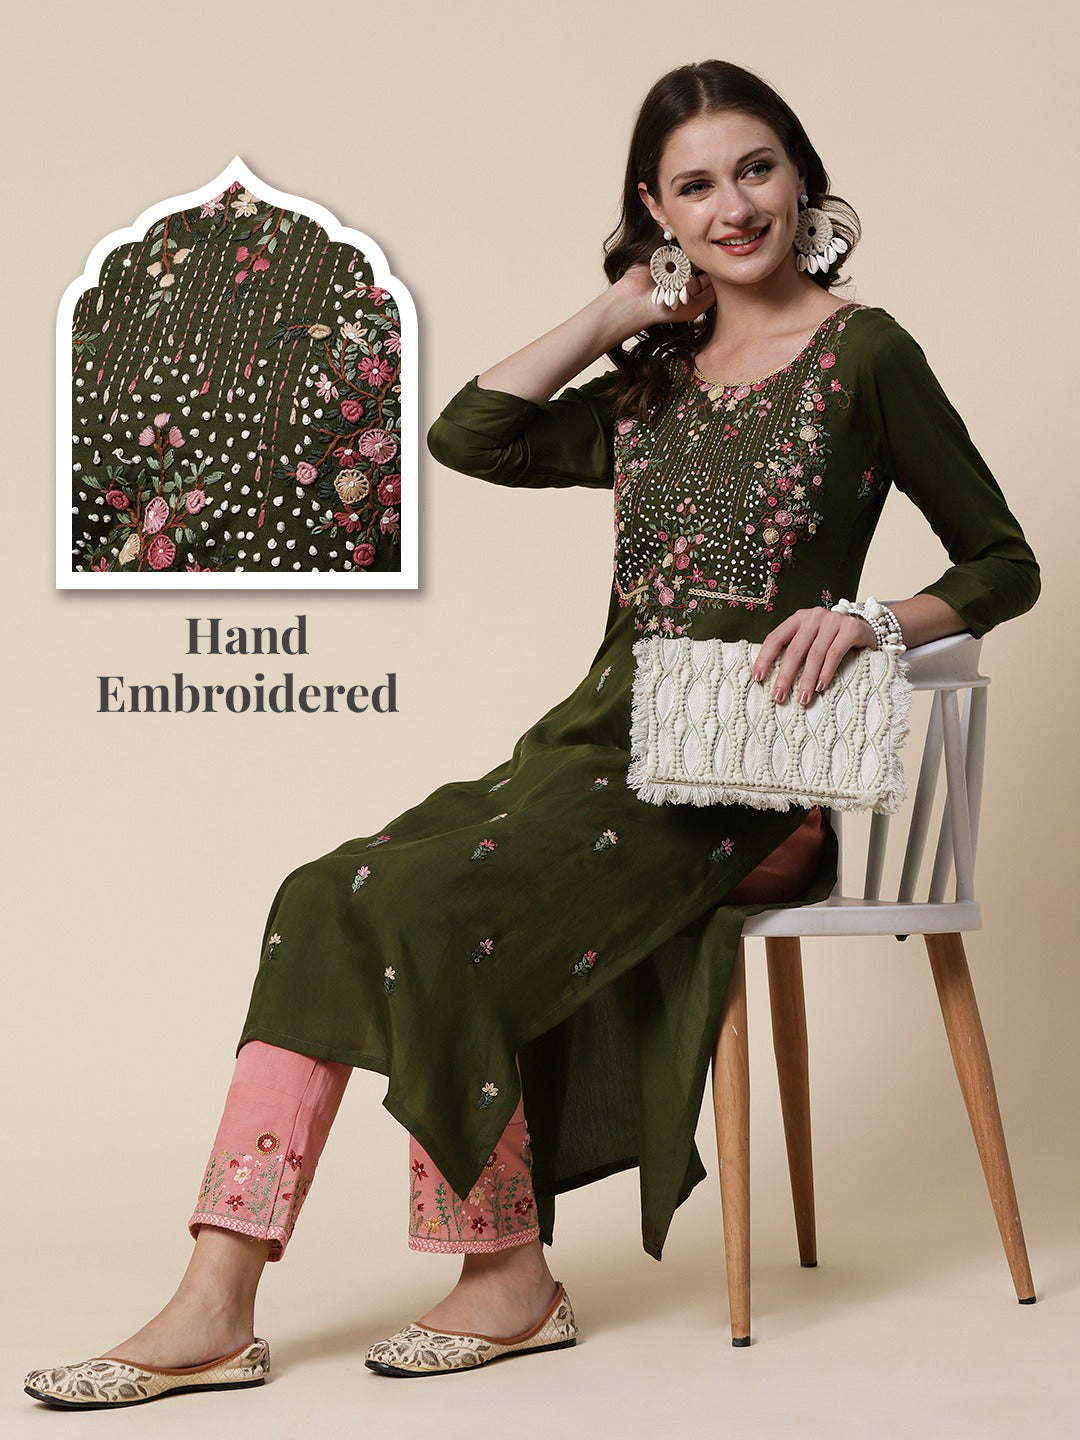 Solid Resham French Knot & Sequins Embroidered Kurta - Dark Olive Green